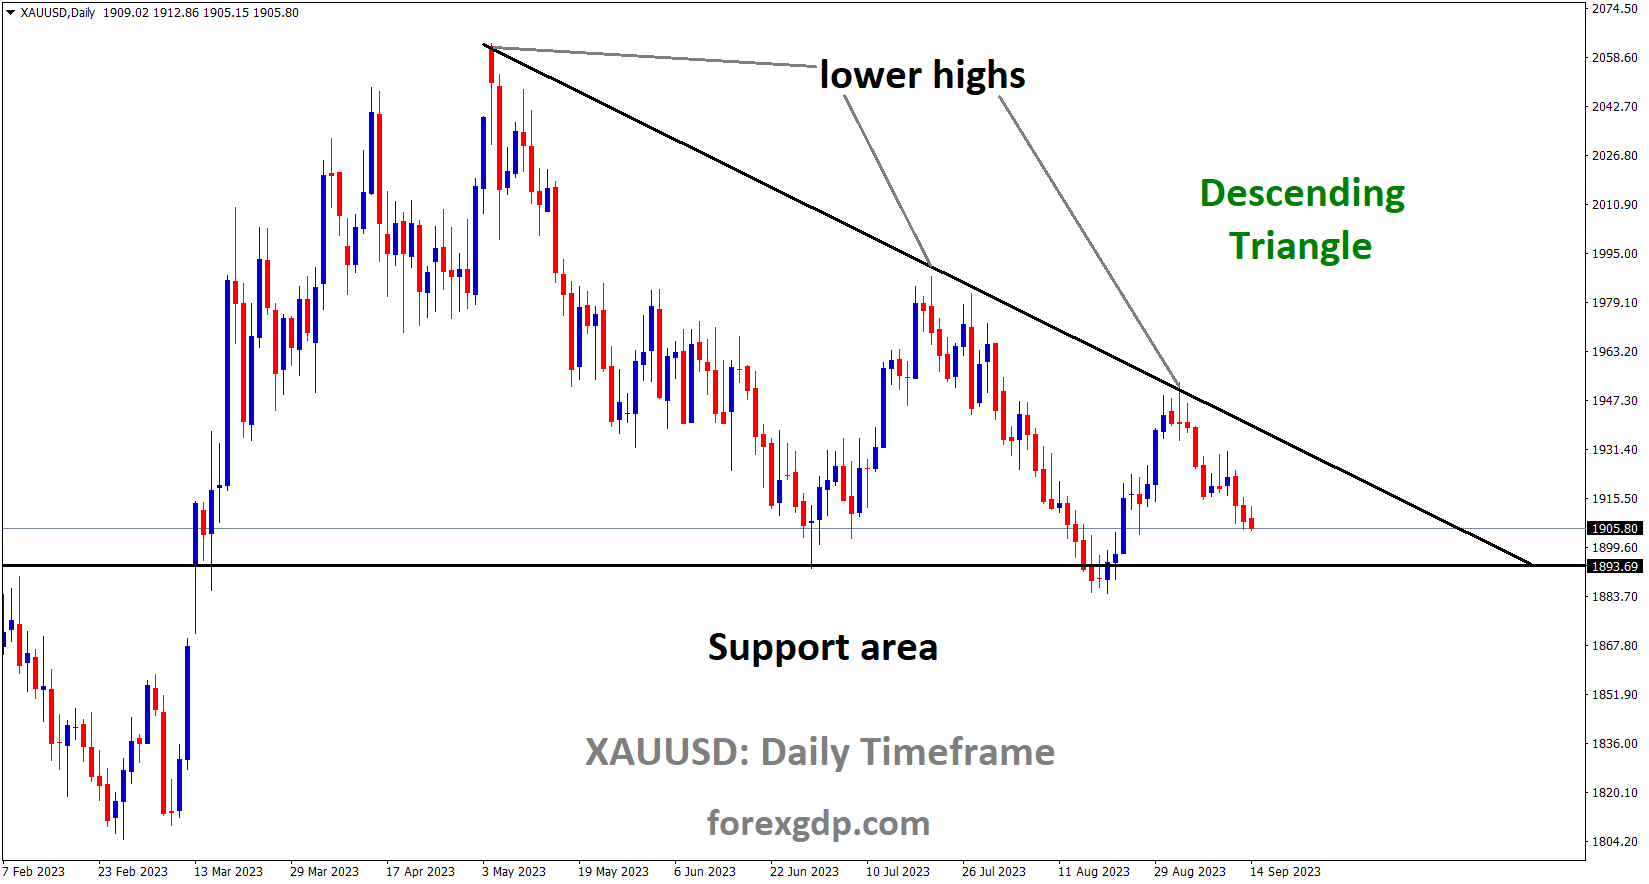 XAUUSD Gold price is moving in the Descending triangle pattern and the market has fallen from the lower high area of the pattern